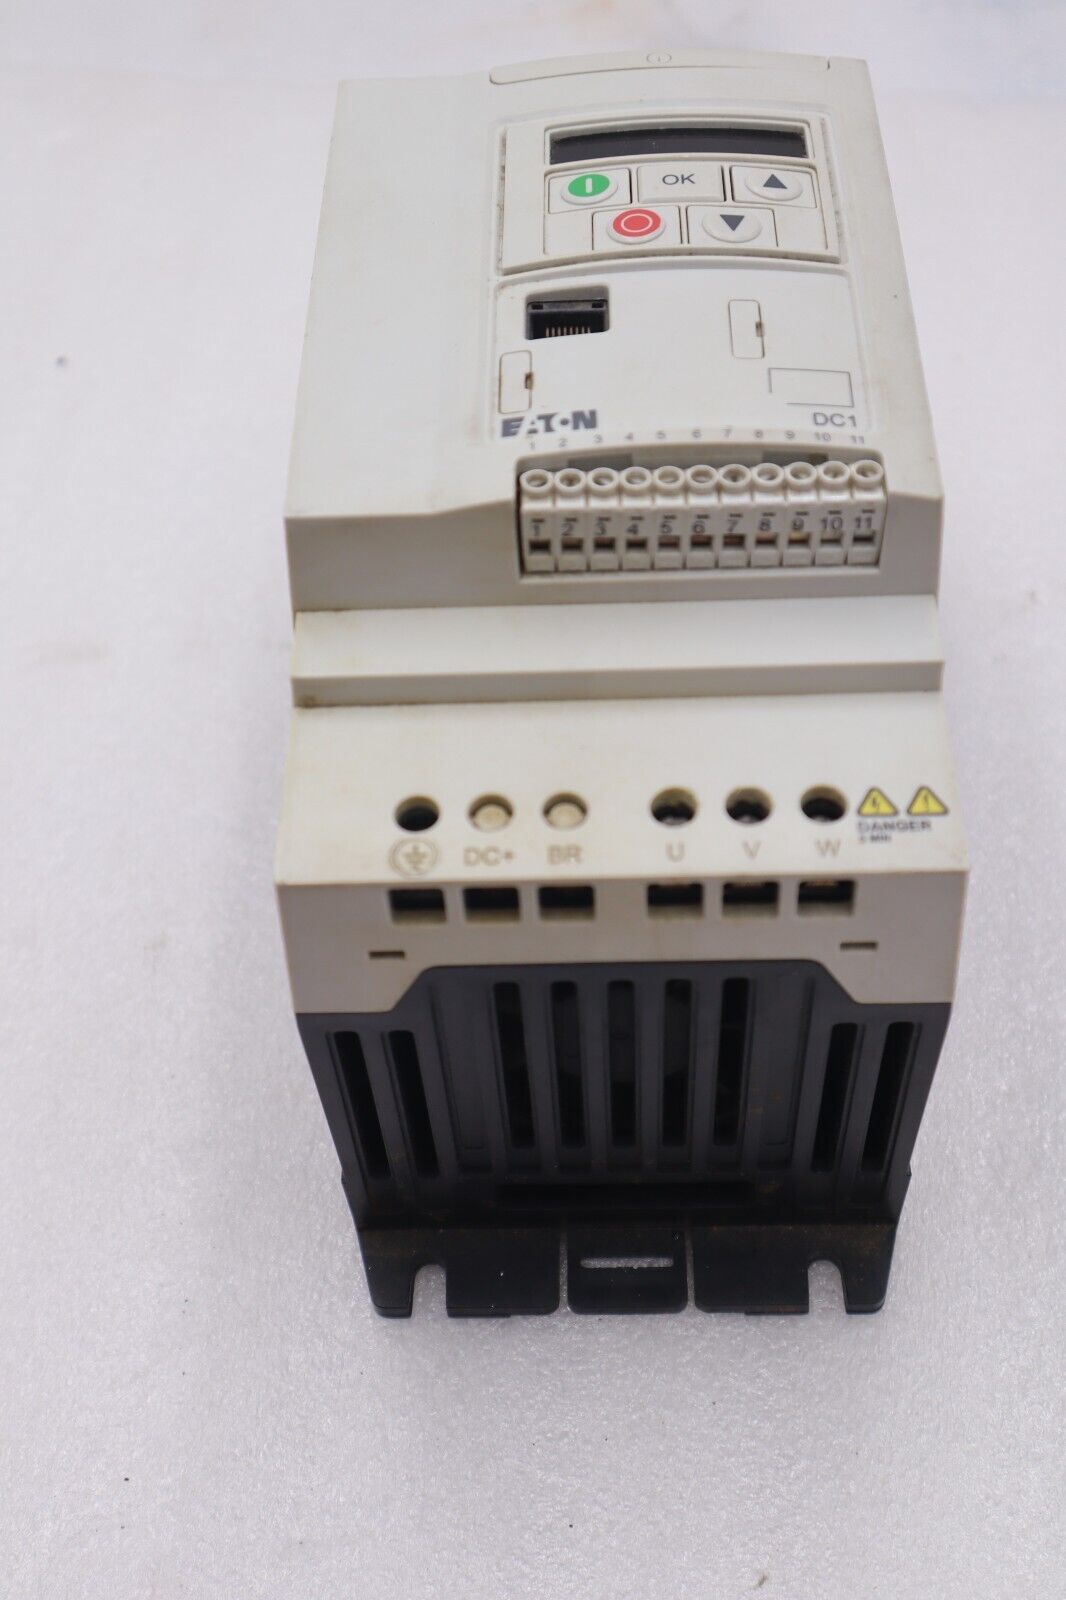 Eaton Dc1-1D5d8nb-A20ce1 Variable Frequency Drive,1-1/2 Hp,115V STOCK L-316A